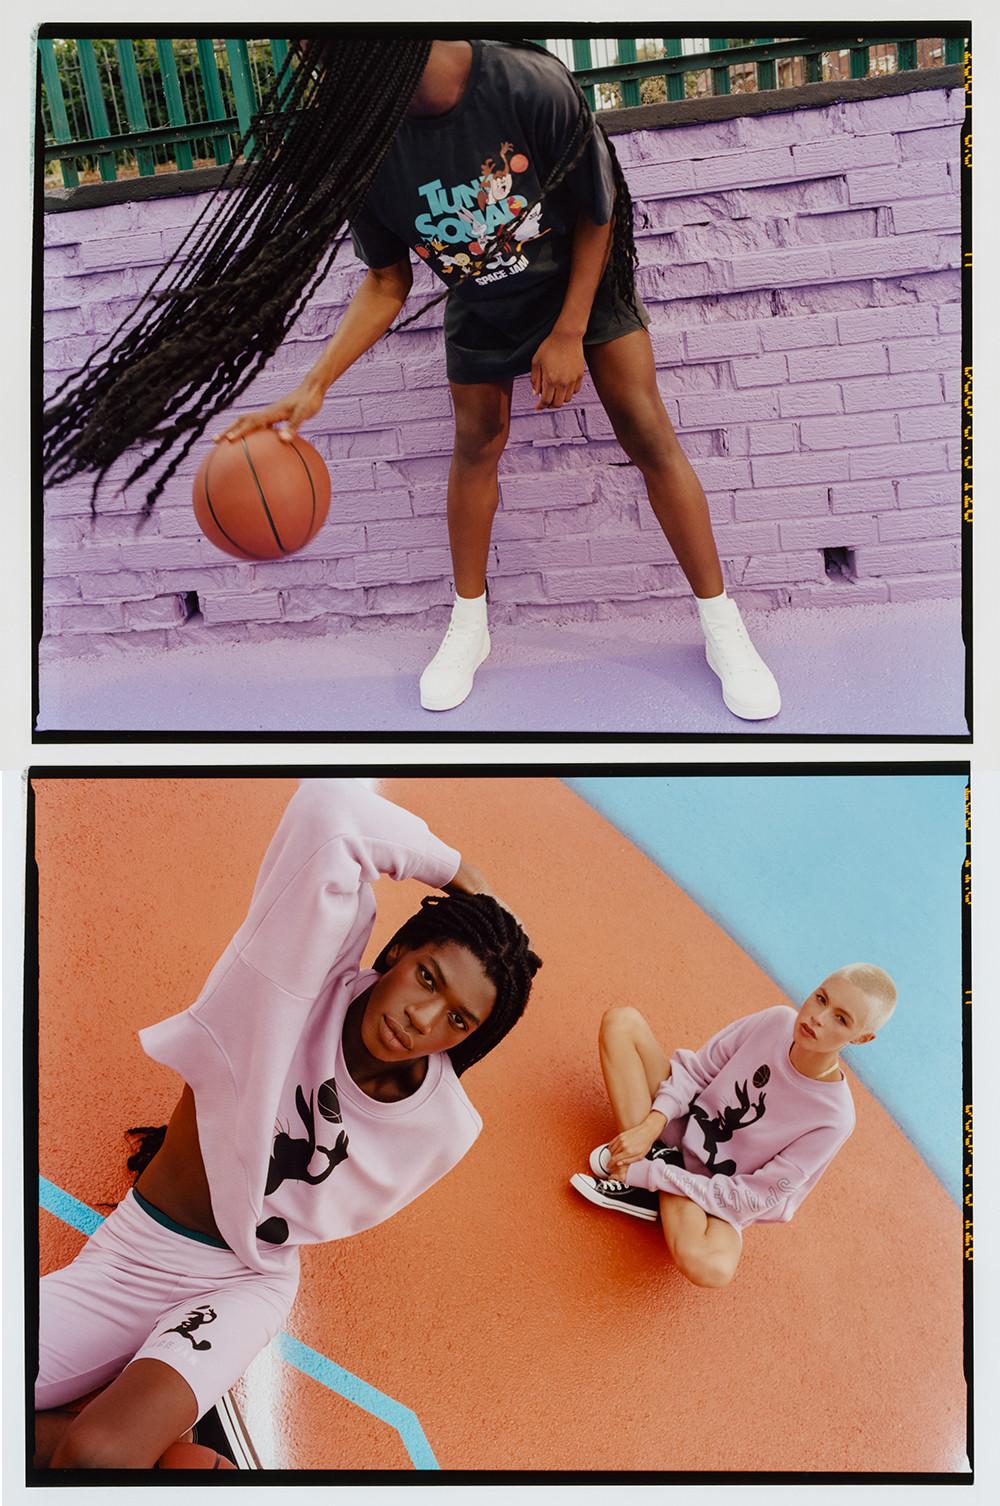 Models wearing Space Jam clothing and playing basketball